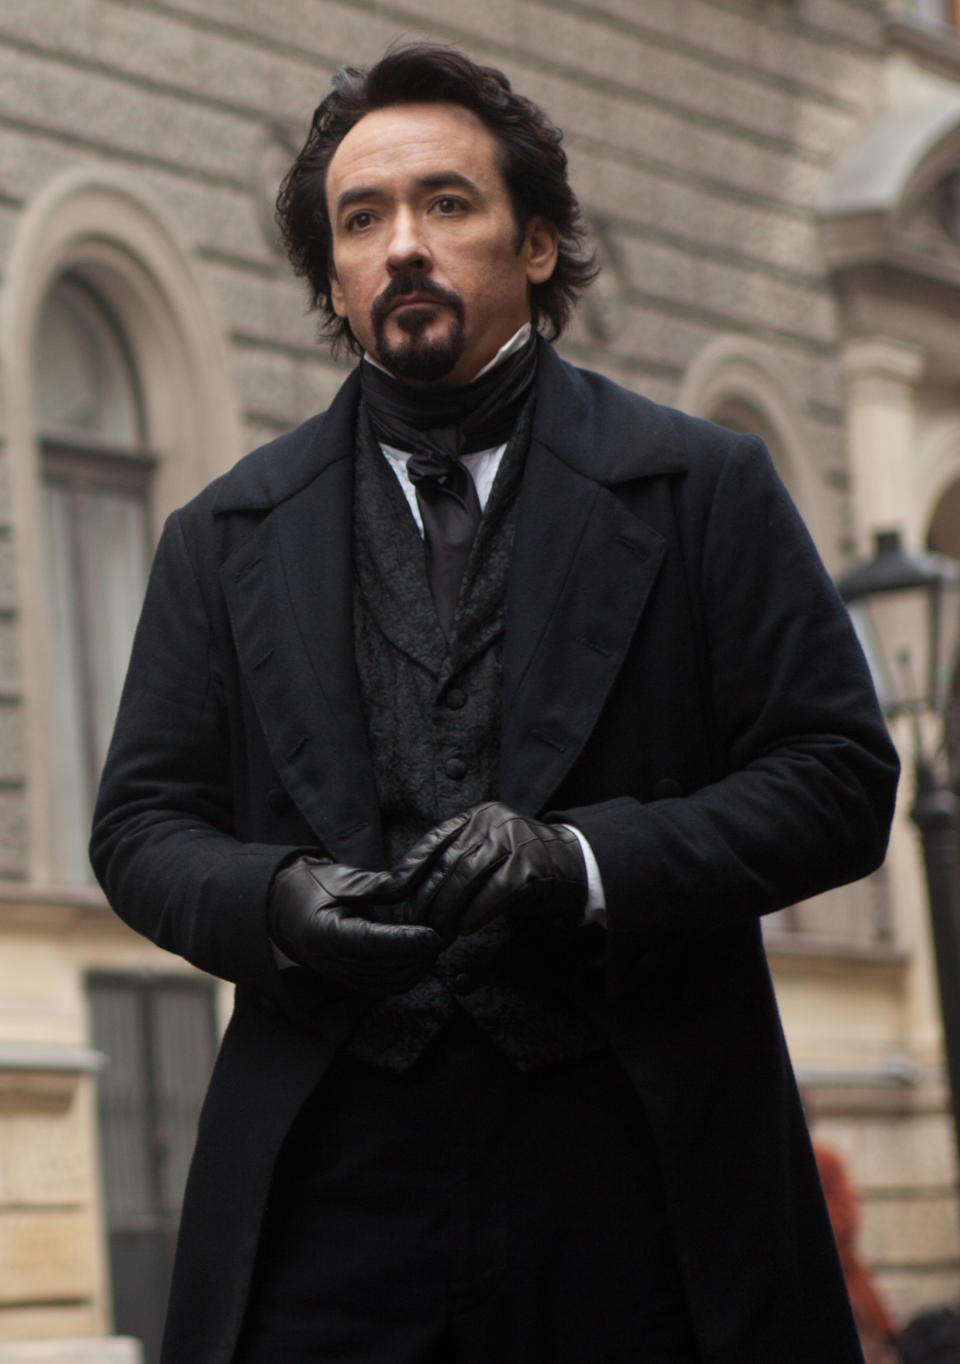 In this film publicity image released by Relativity Media, John Cusack portrays Edgar Allan Poe in a scene from the gothic thriller "The Raven." (AP Photo/Relativity Media, Larry Horricks)